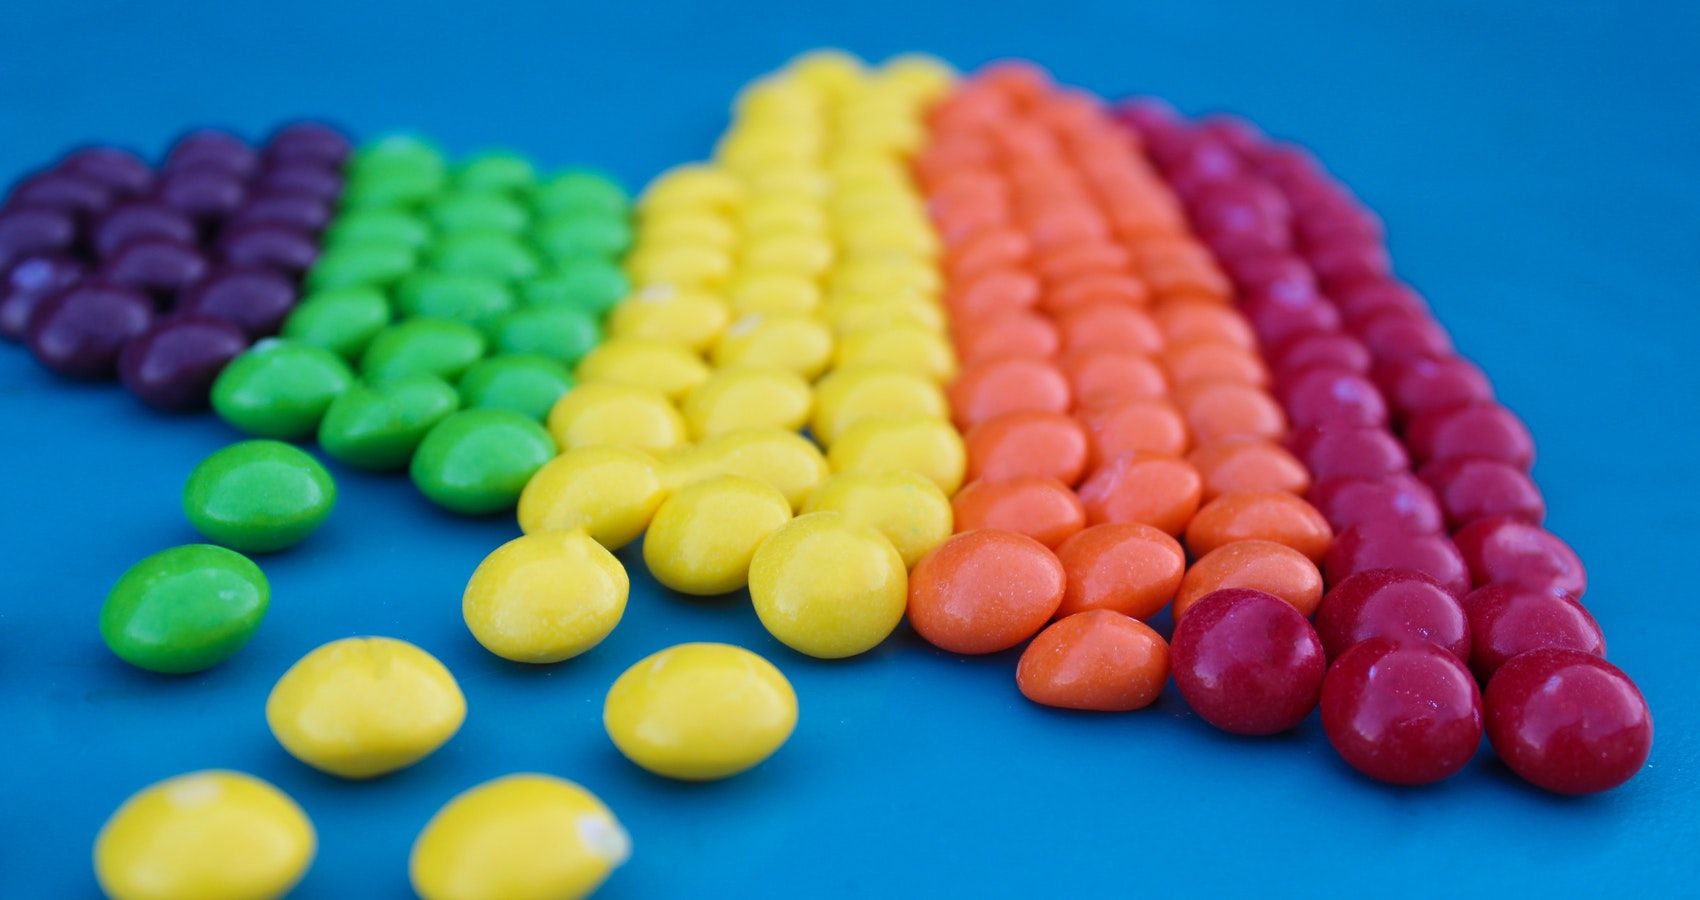 Skittles is bringing back lime flavor after 8 years